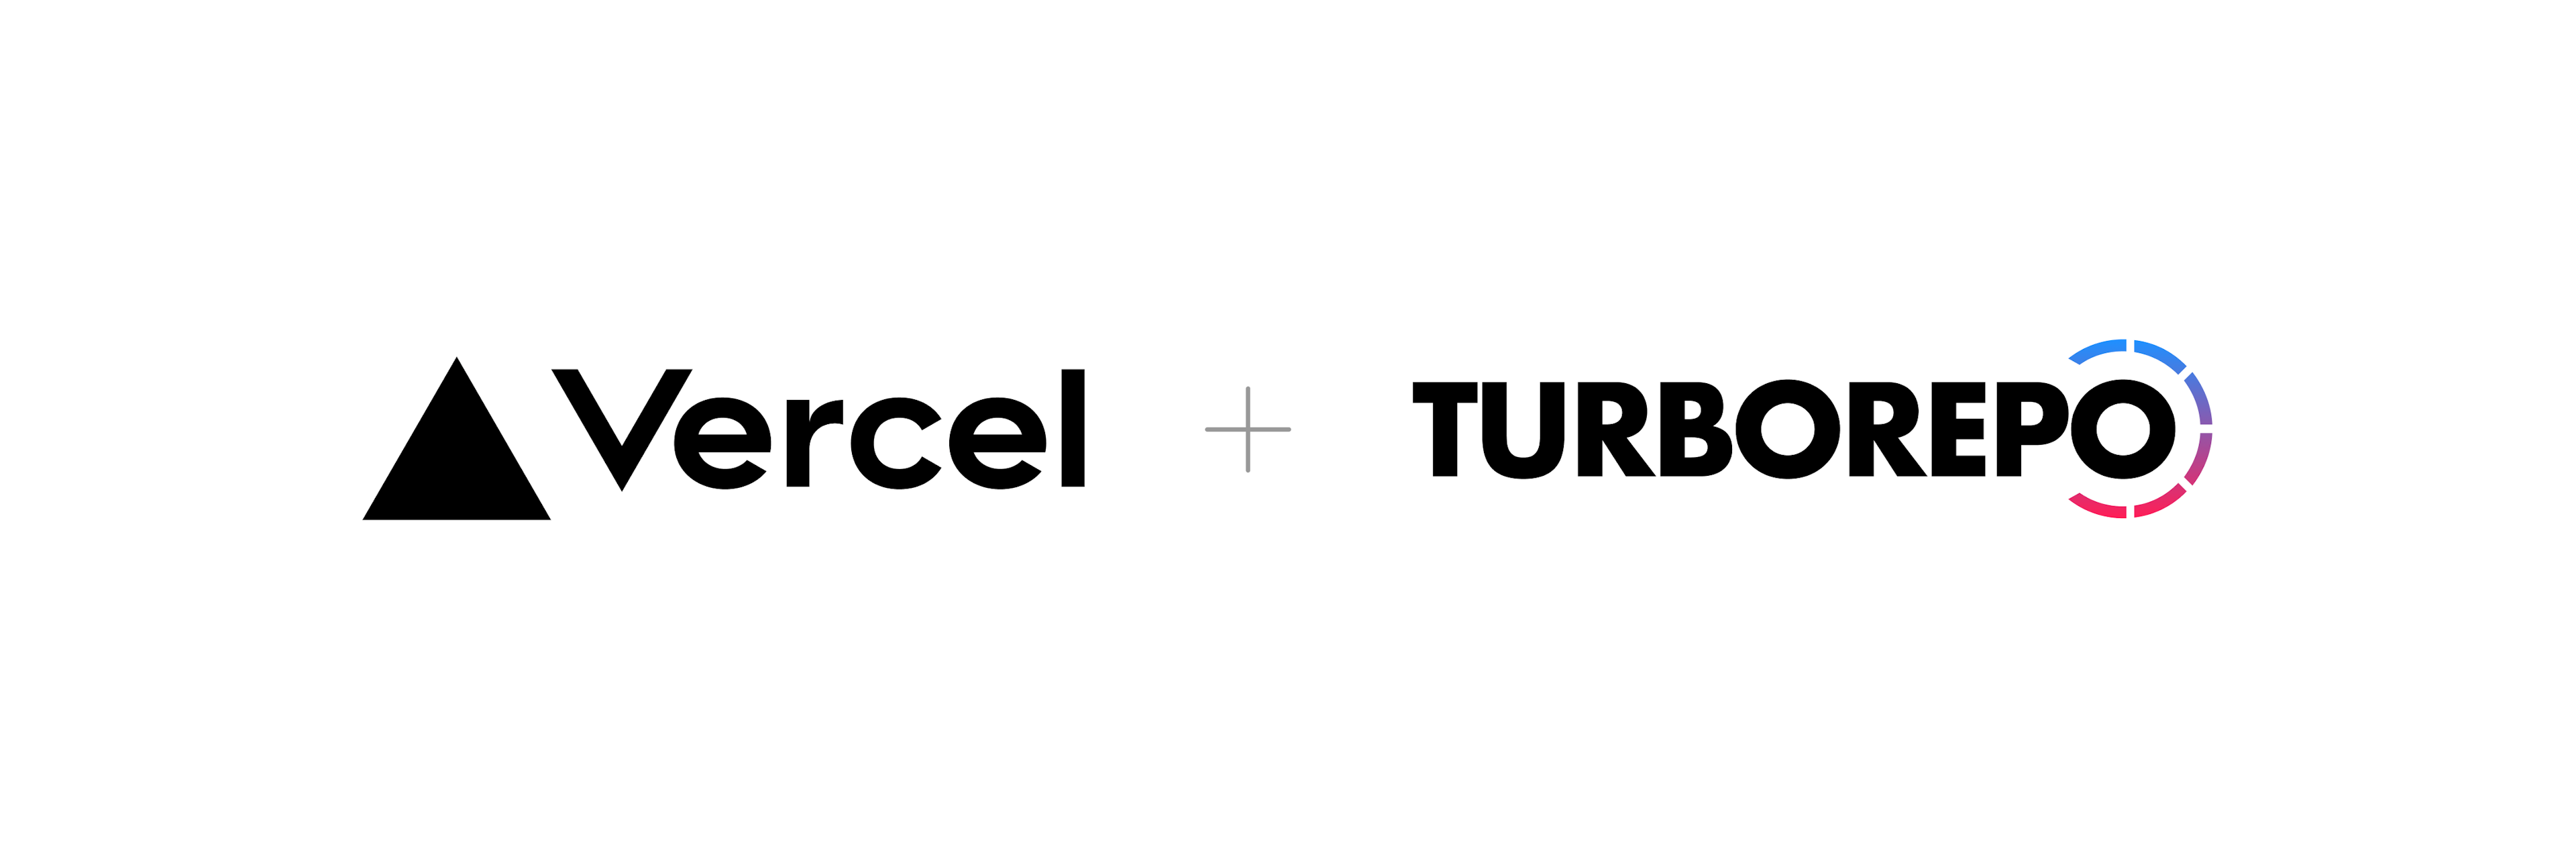 Announcing Vercel's acquisition of Turborepo, a powerful build system for JavaScript and TypeScript codebases.
